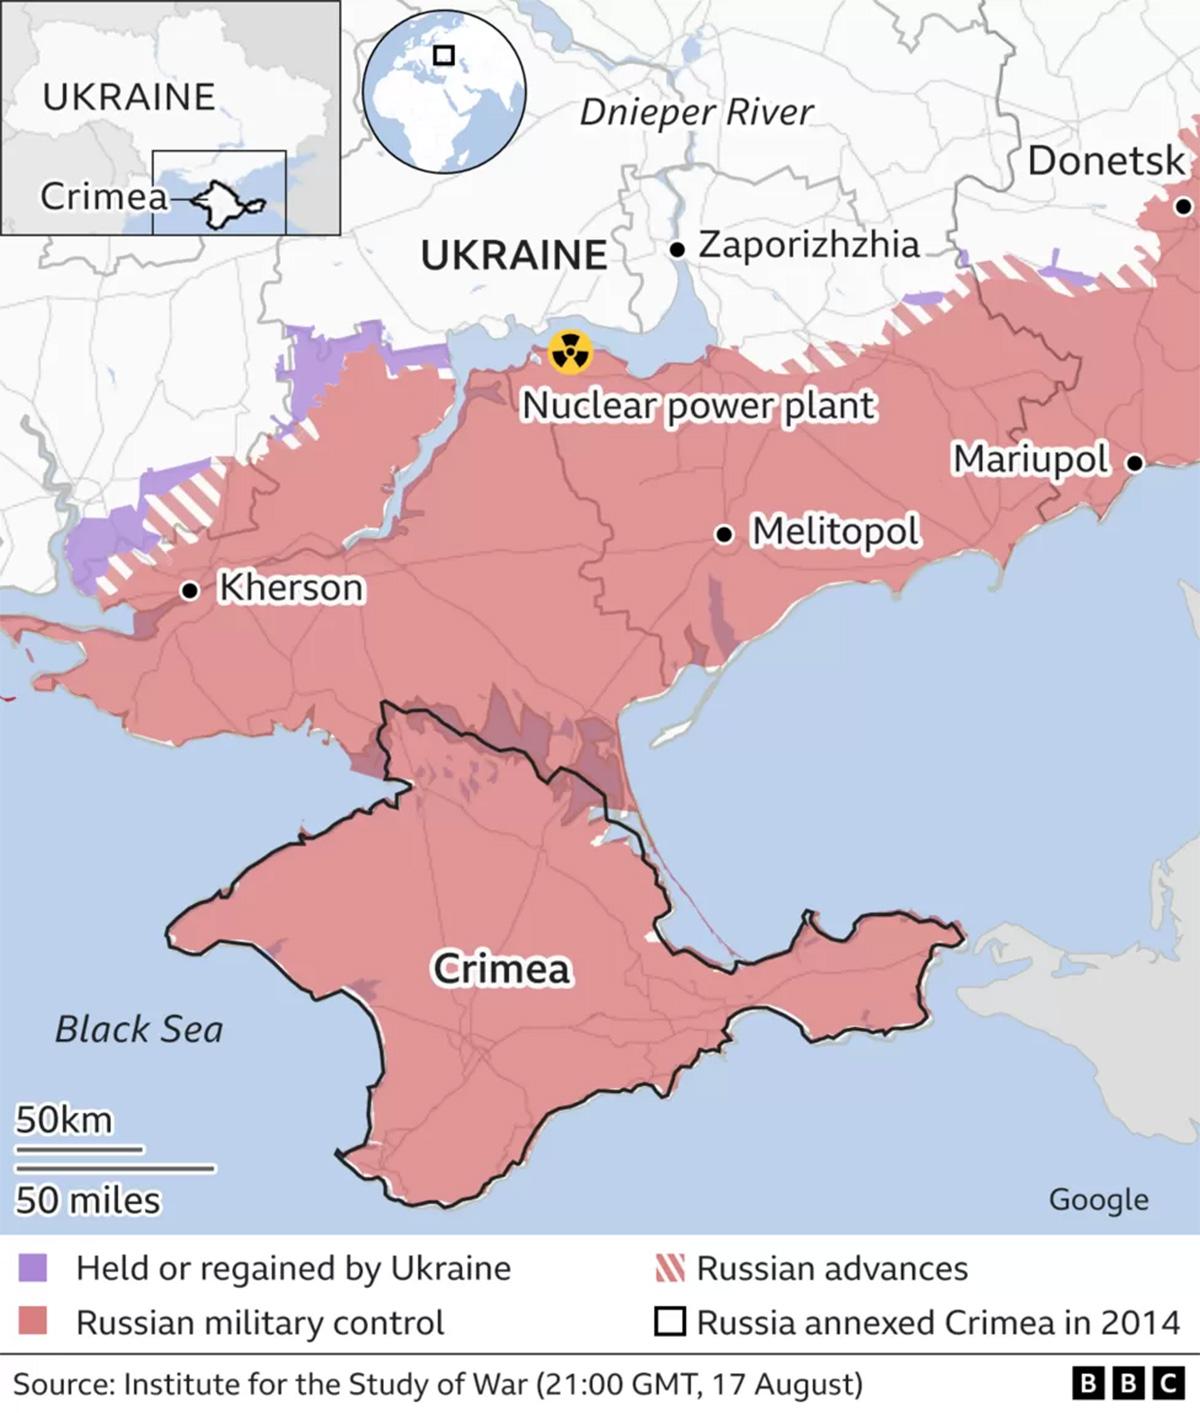 South Ukraine showing Crimea and position of nuclear plant at Zaporizhzhia.